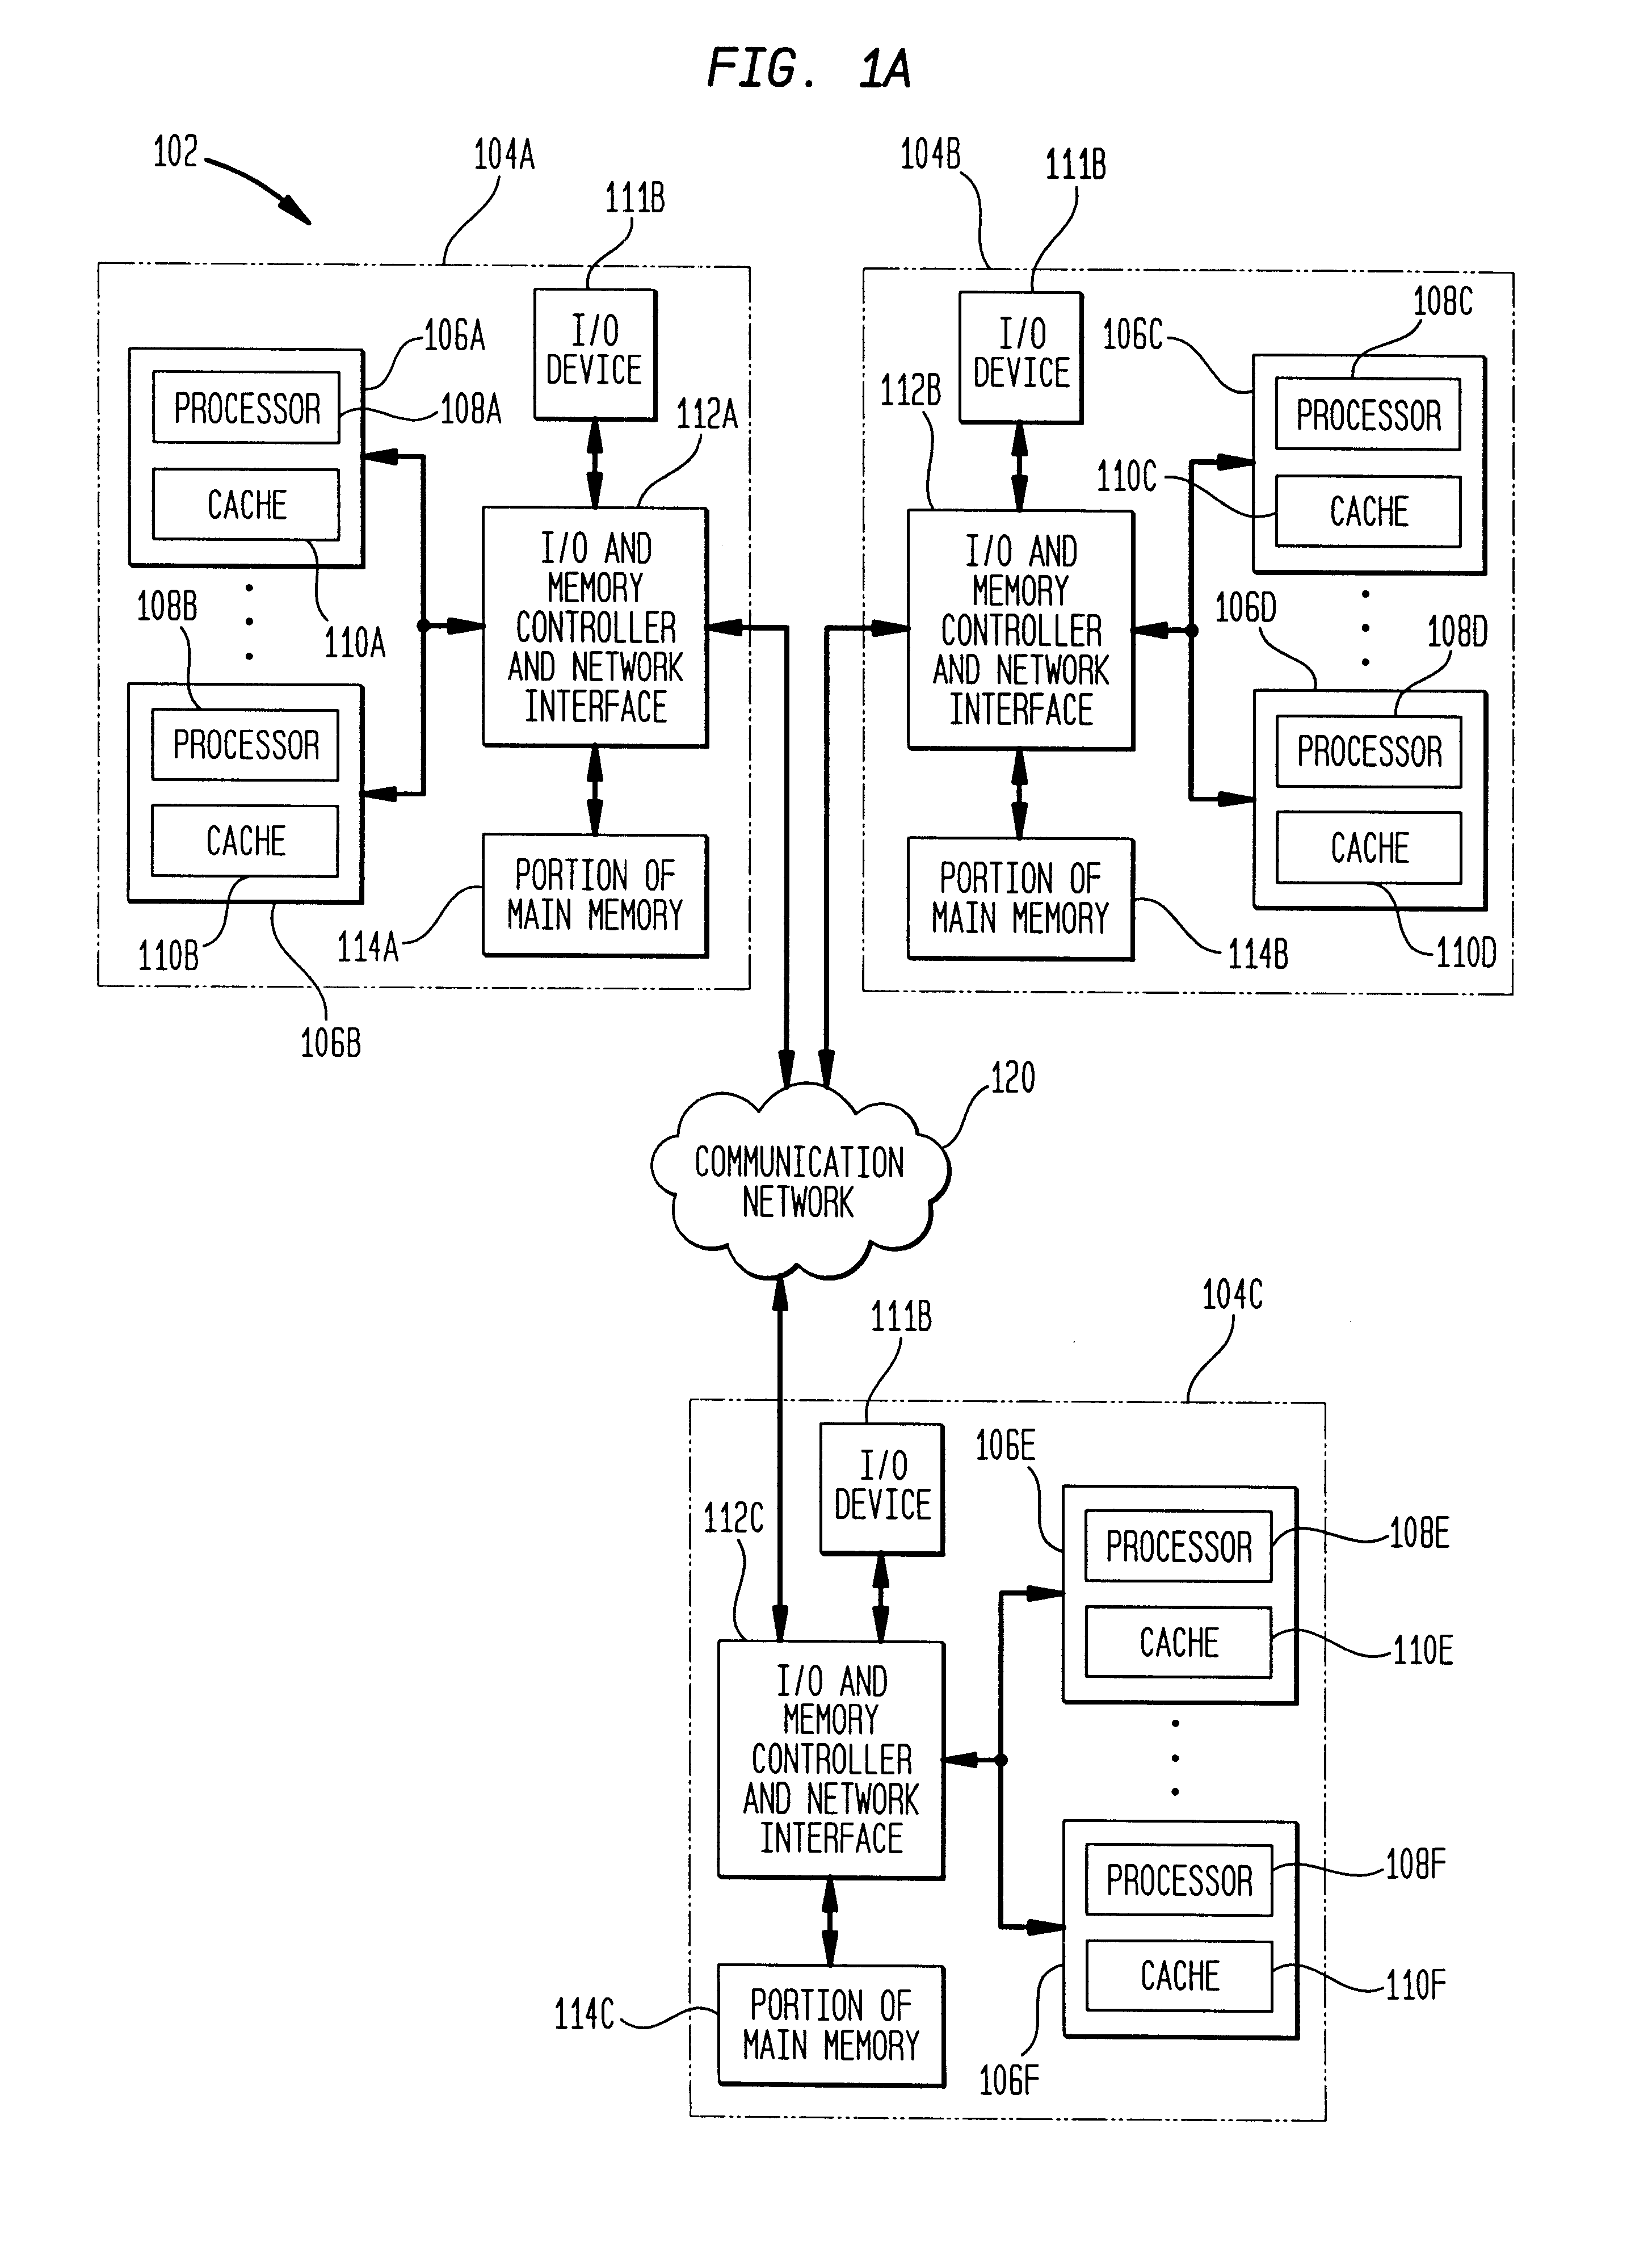 Method, system and computer program product for managing memory in a non-uniform memory access system